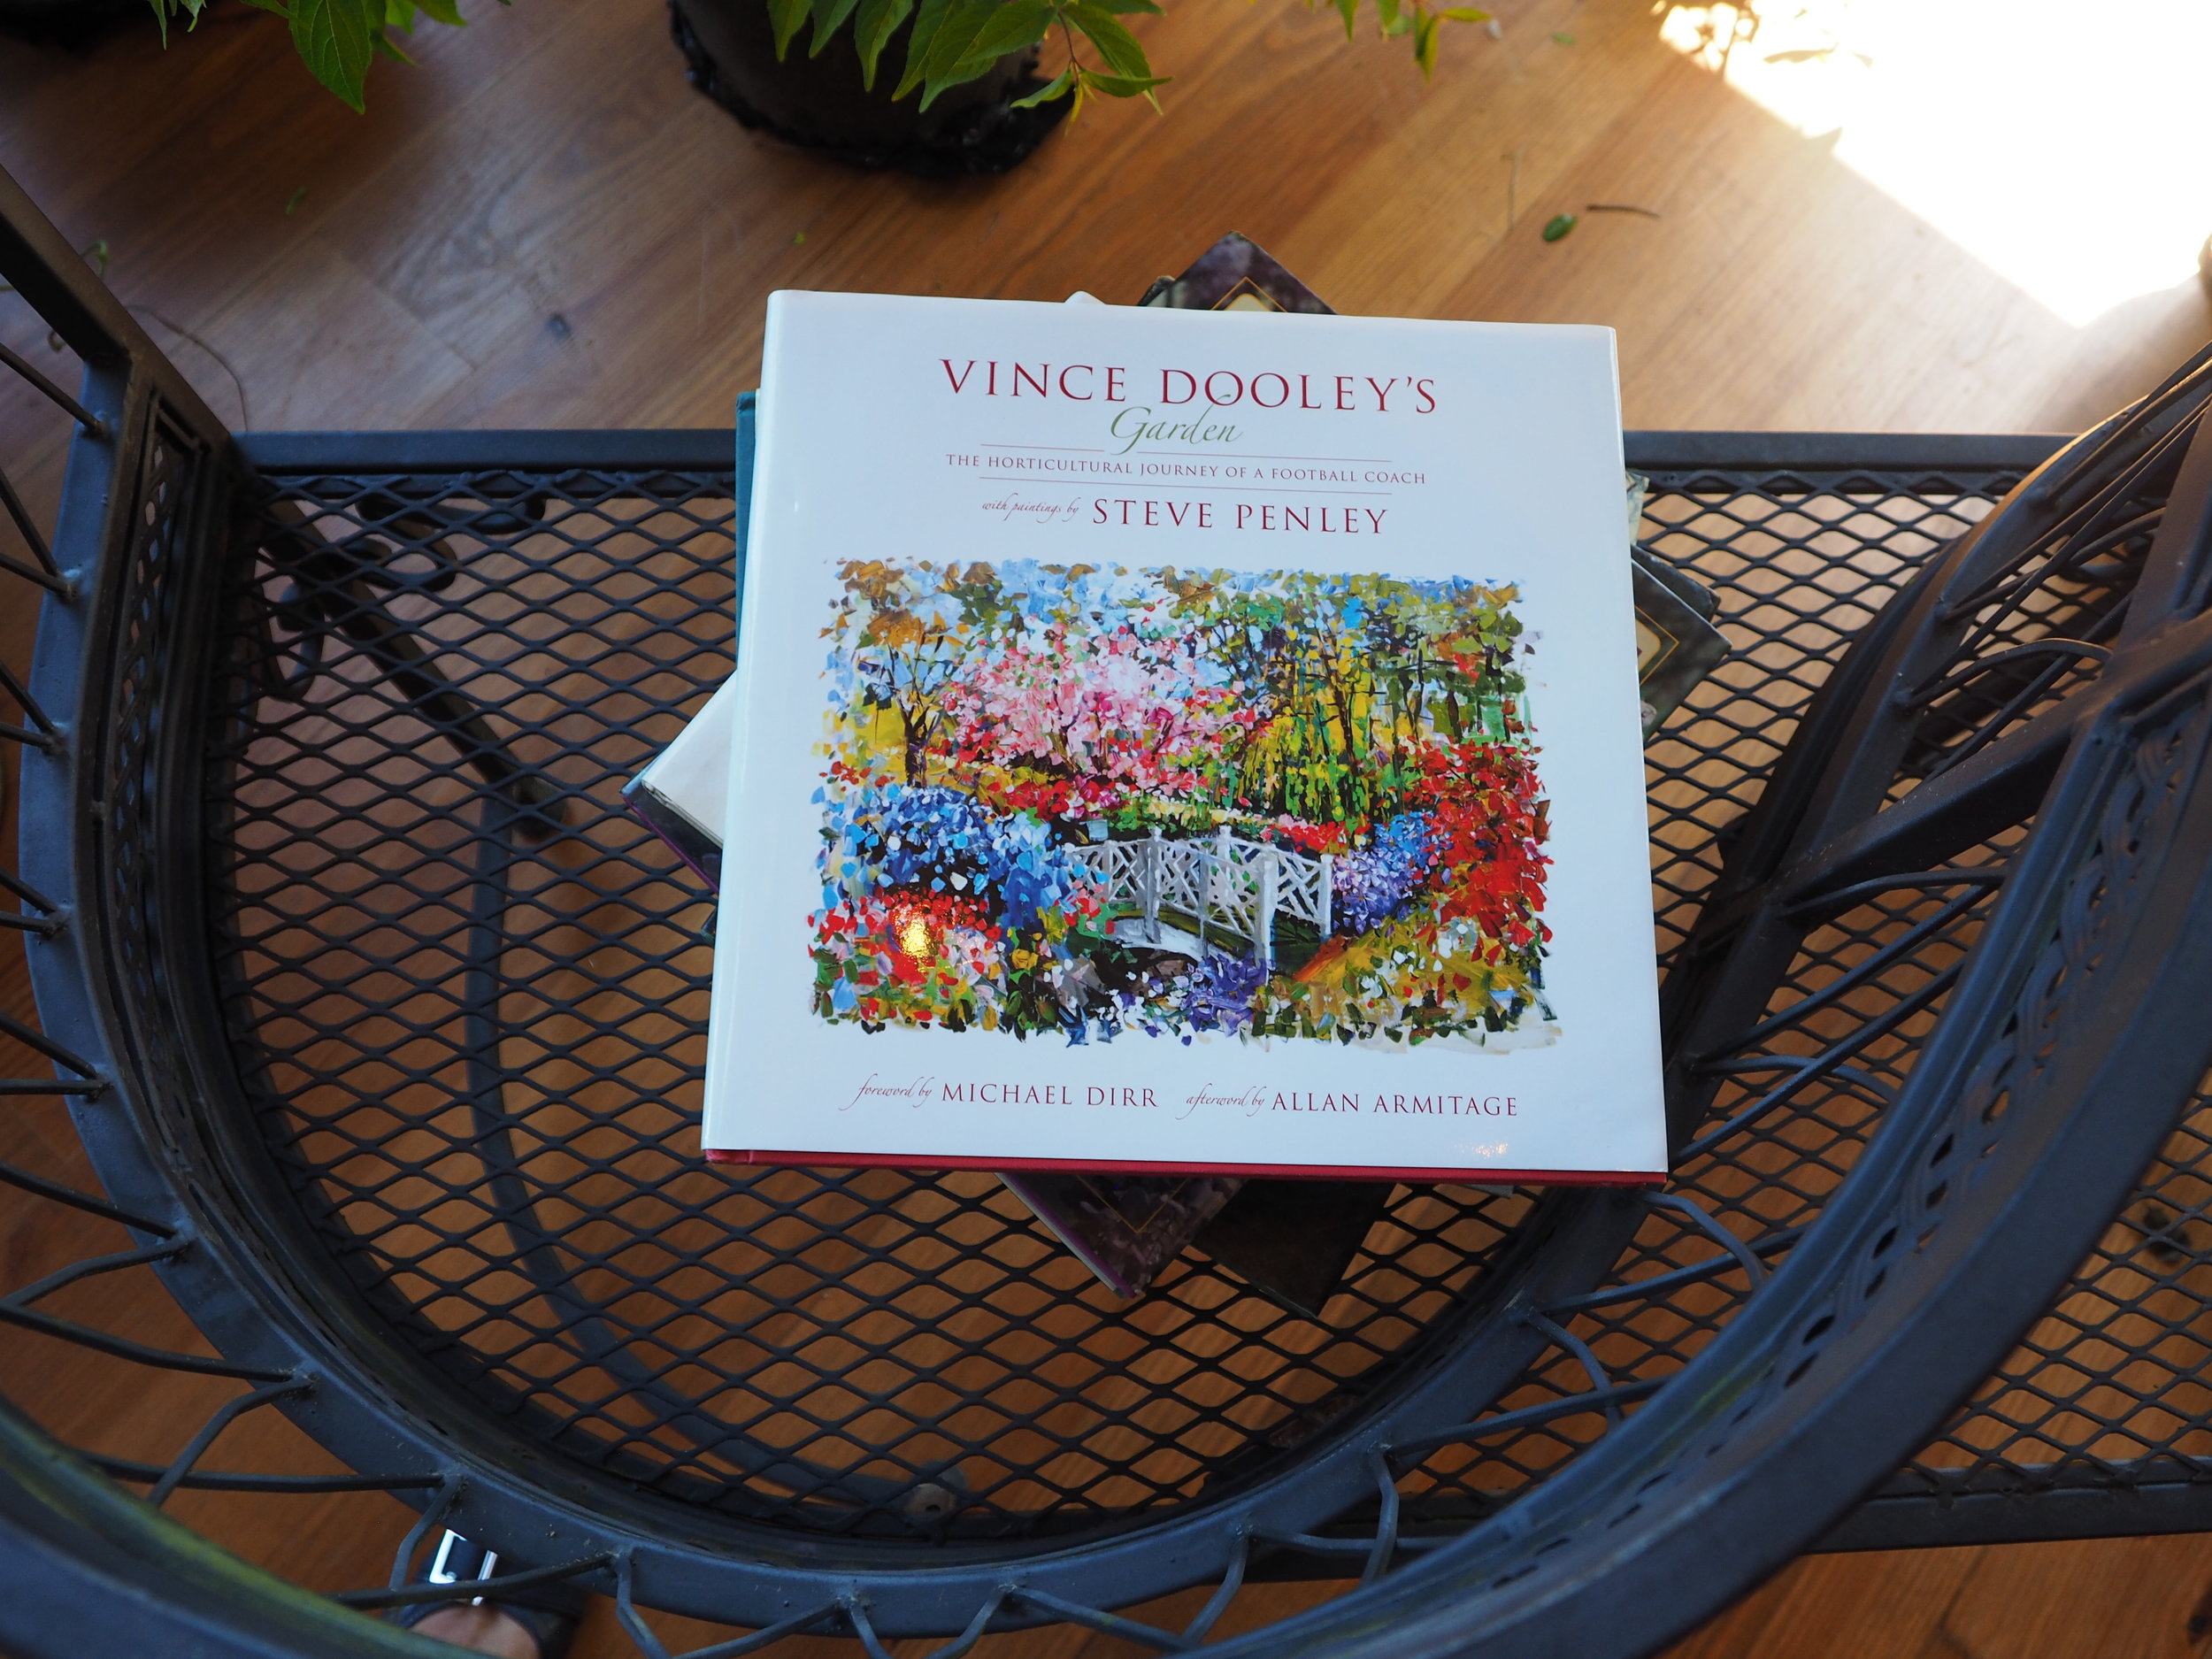 Vince Dooley’s book about his own legendary garden was on display.